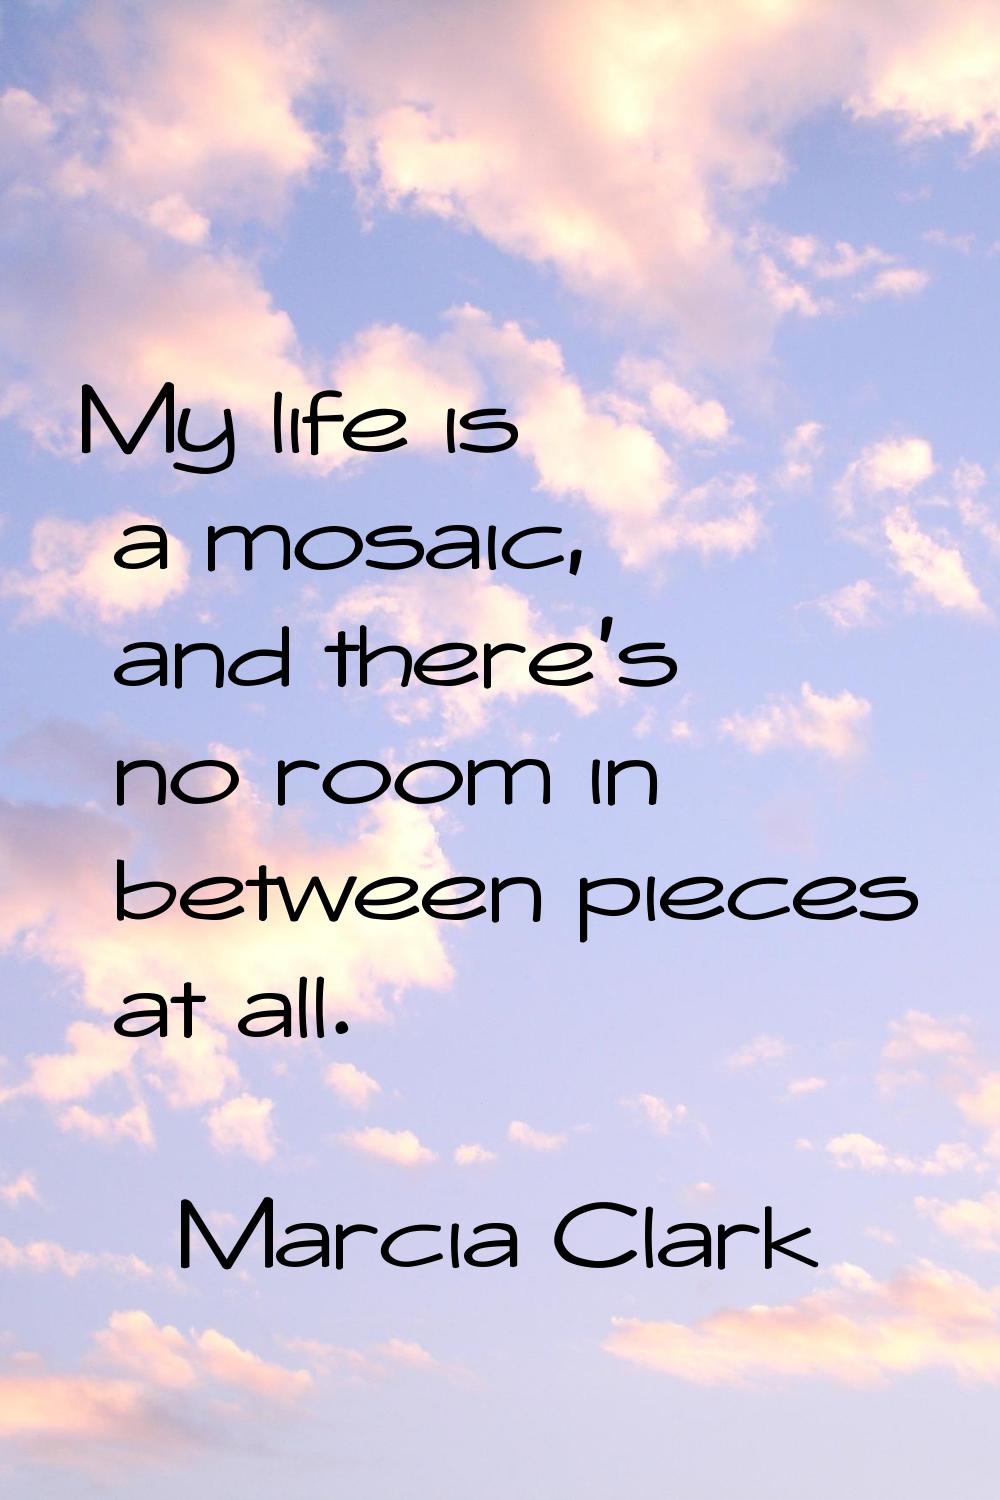 My life is a mosaic, and there's no room in between pieces at all.